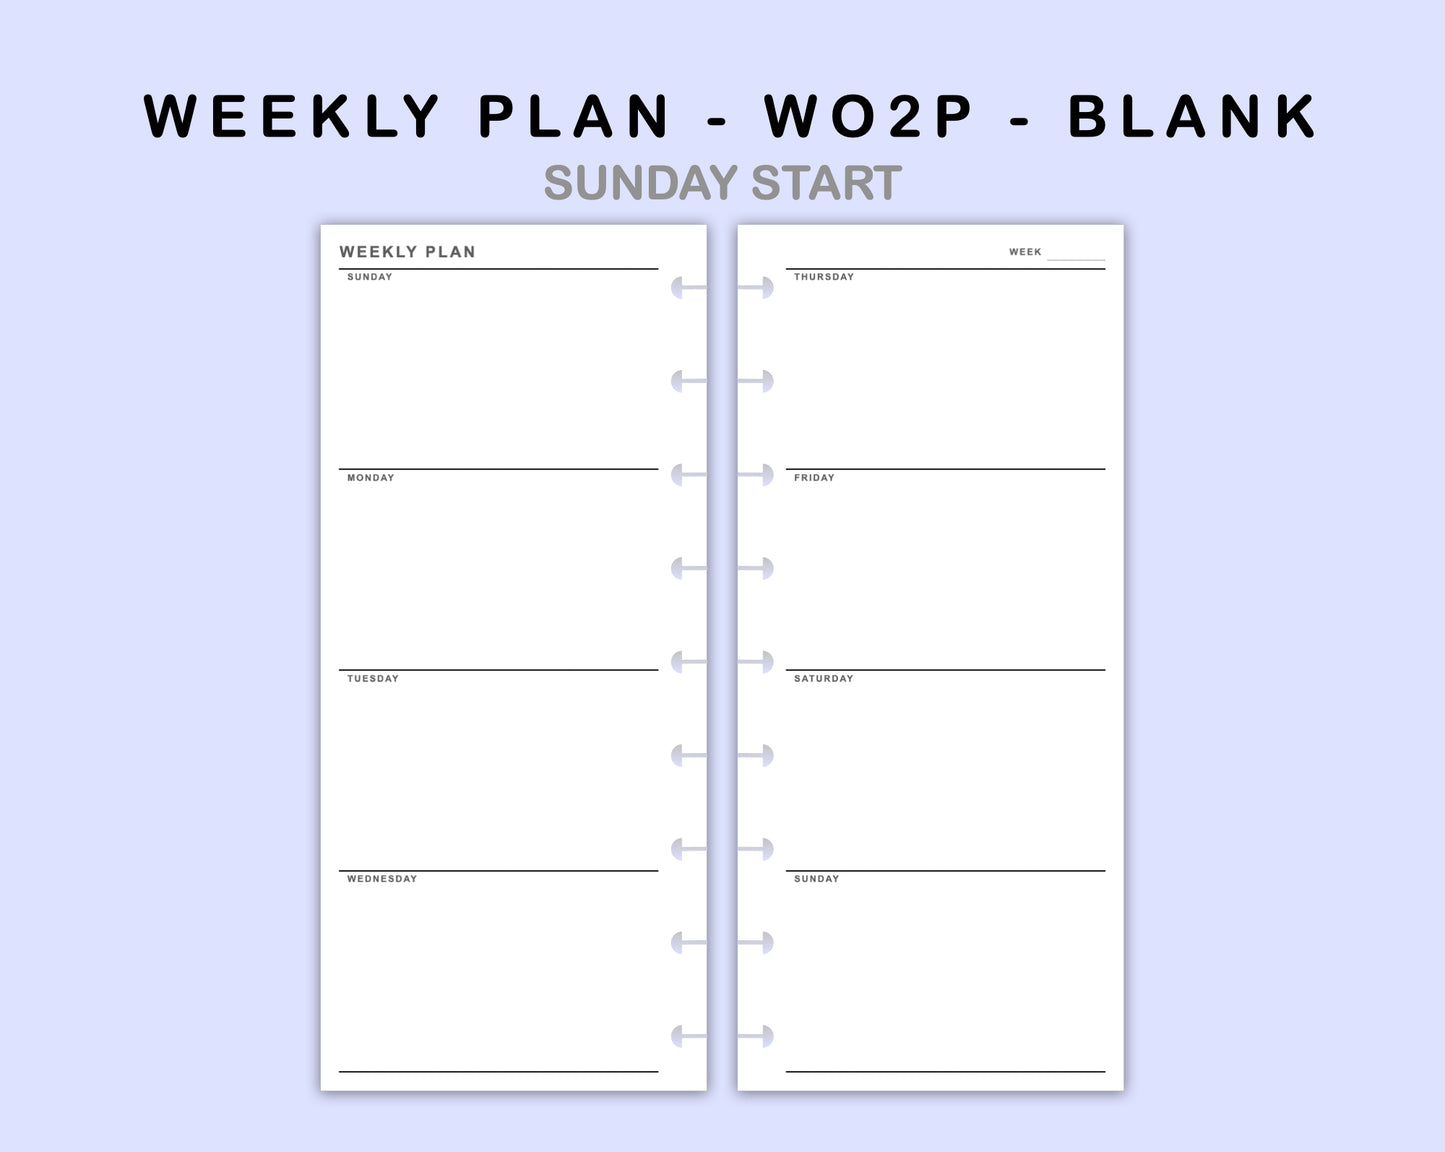 Skinny Classic HP Inserts - Weekly Plan - WO2P - Blank